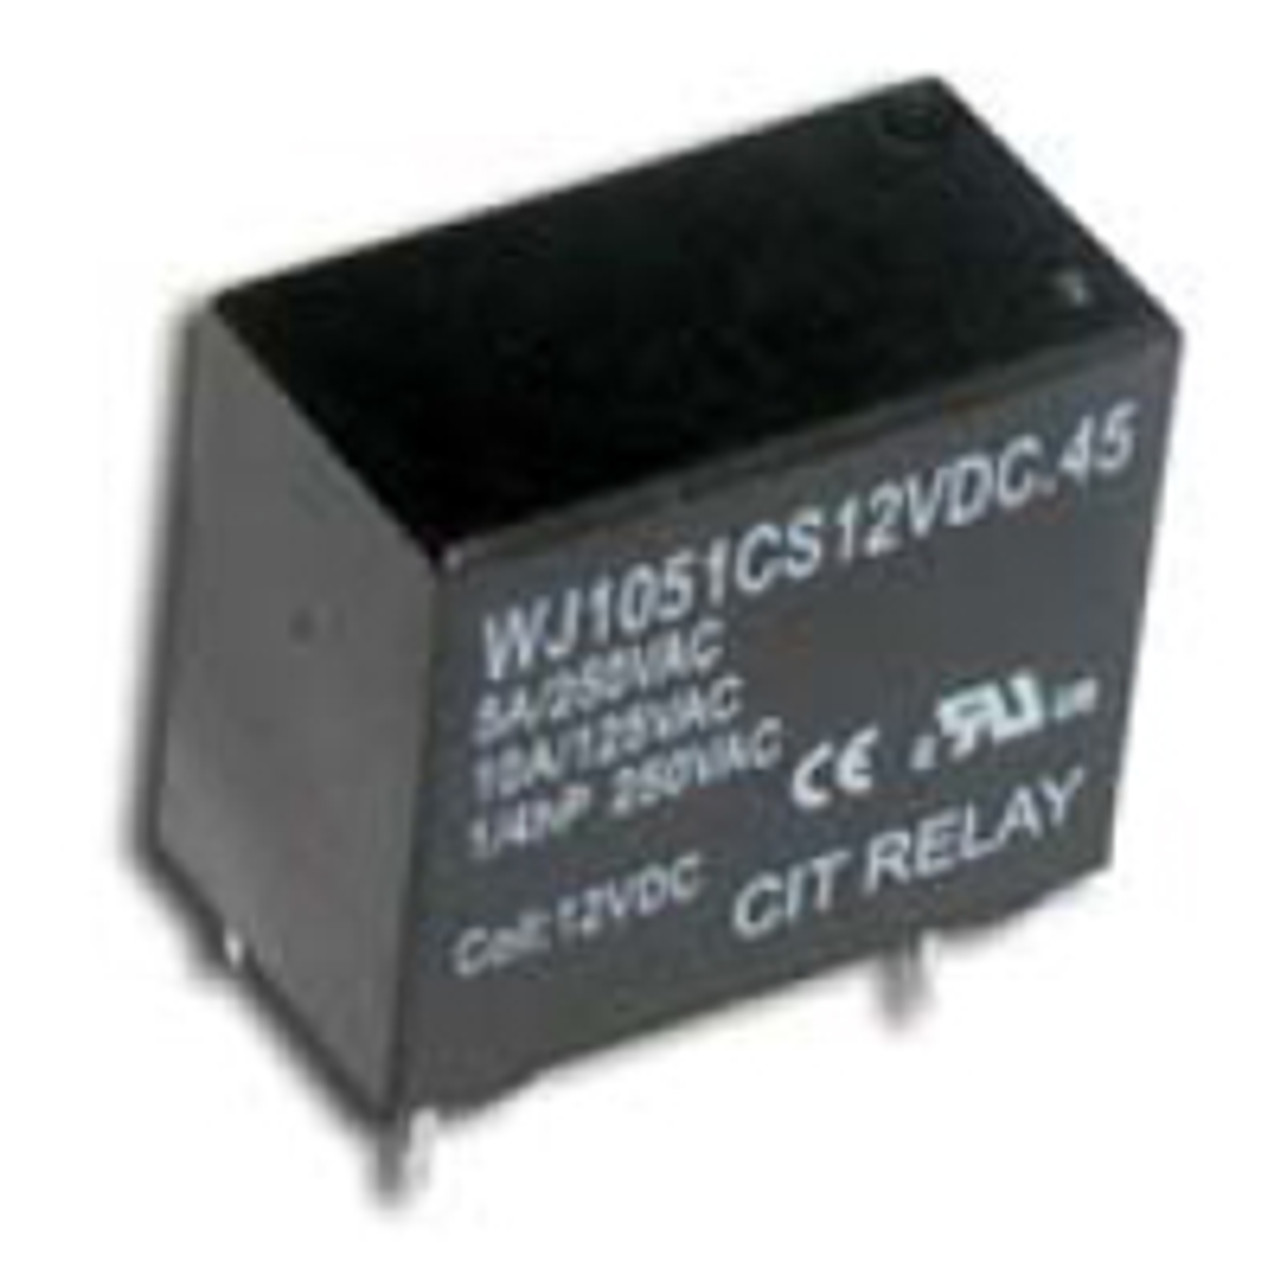 CIT Relay and Switch J1051C9VDC.45 General Purpose Relays